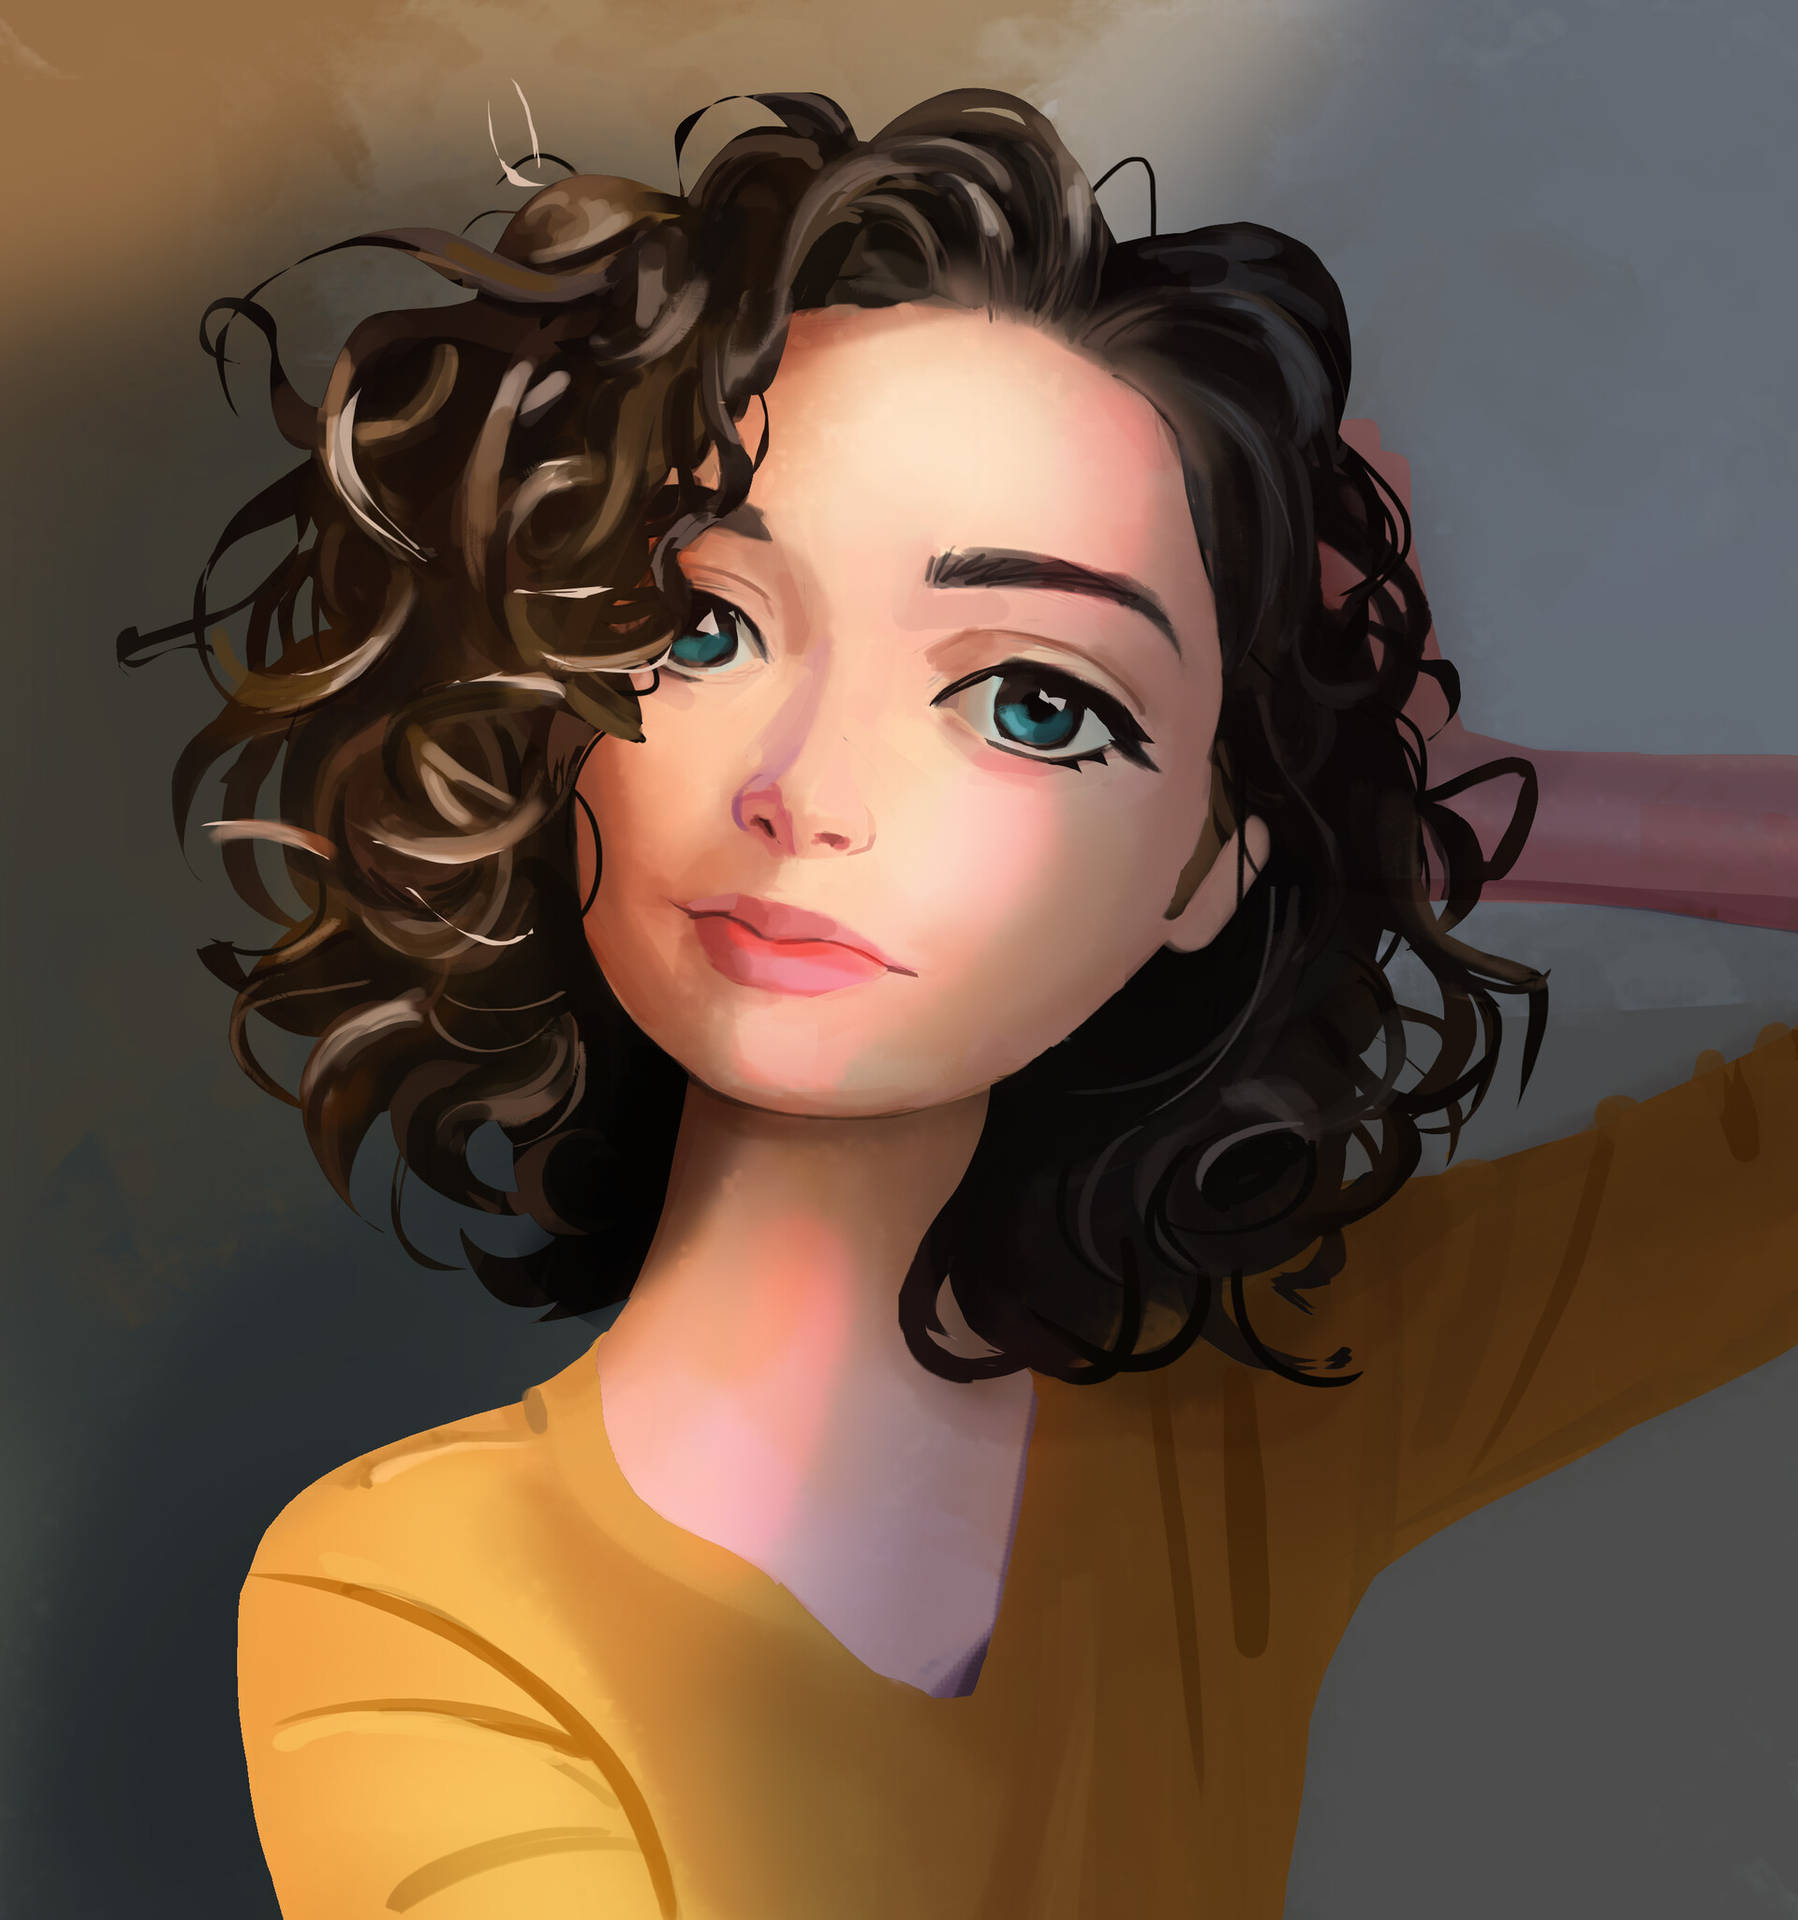 Realistic 3d Woman With Curly Hair Wallpaper